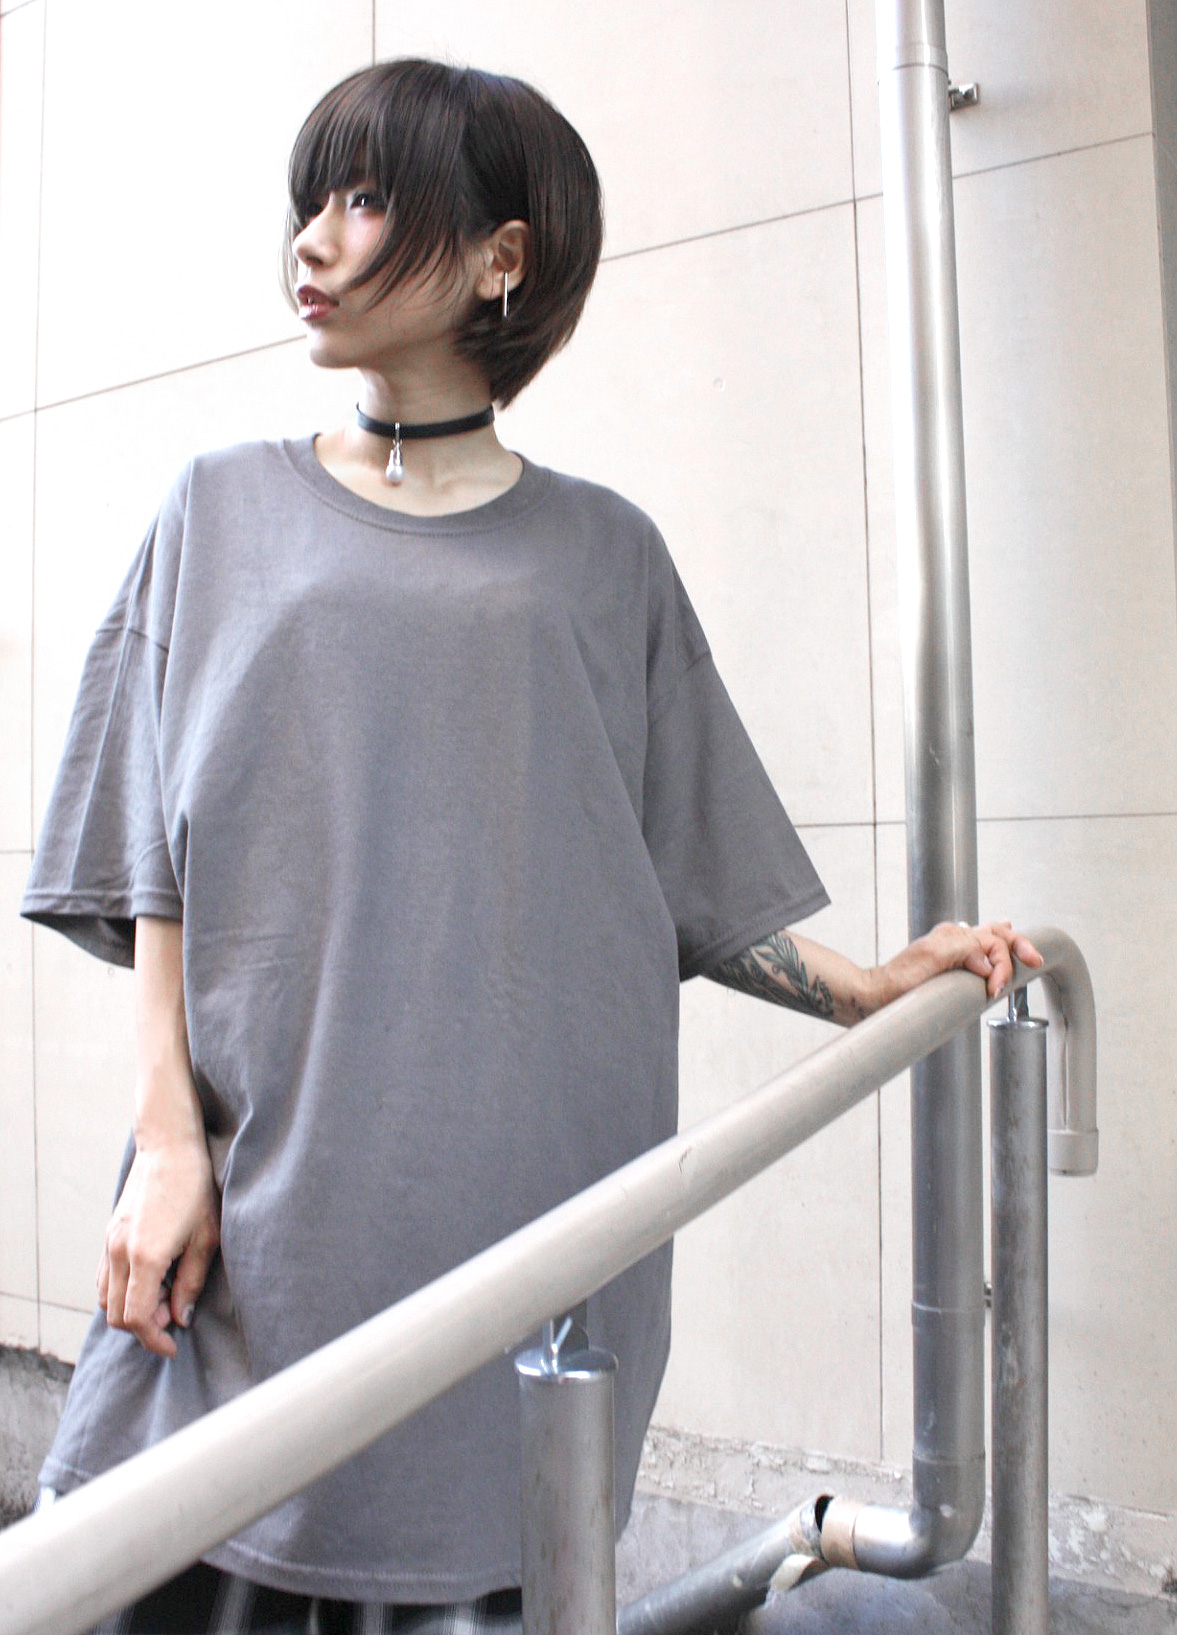 2017.06.20 - unclod - STYLING